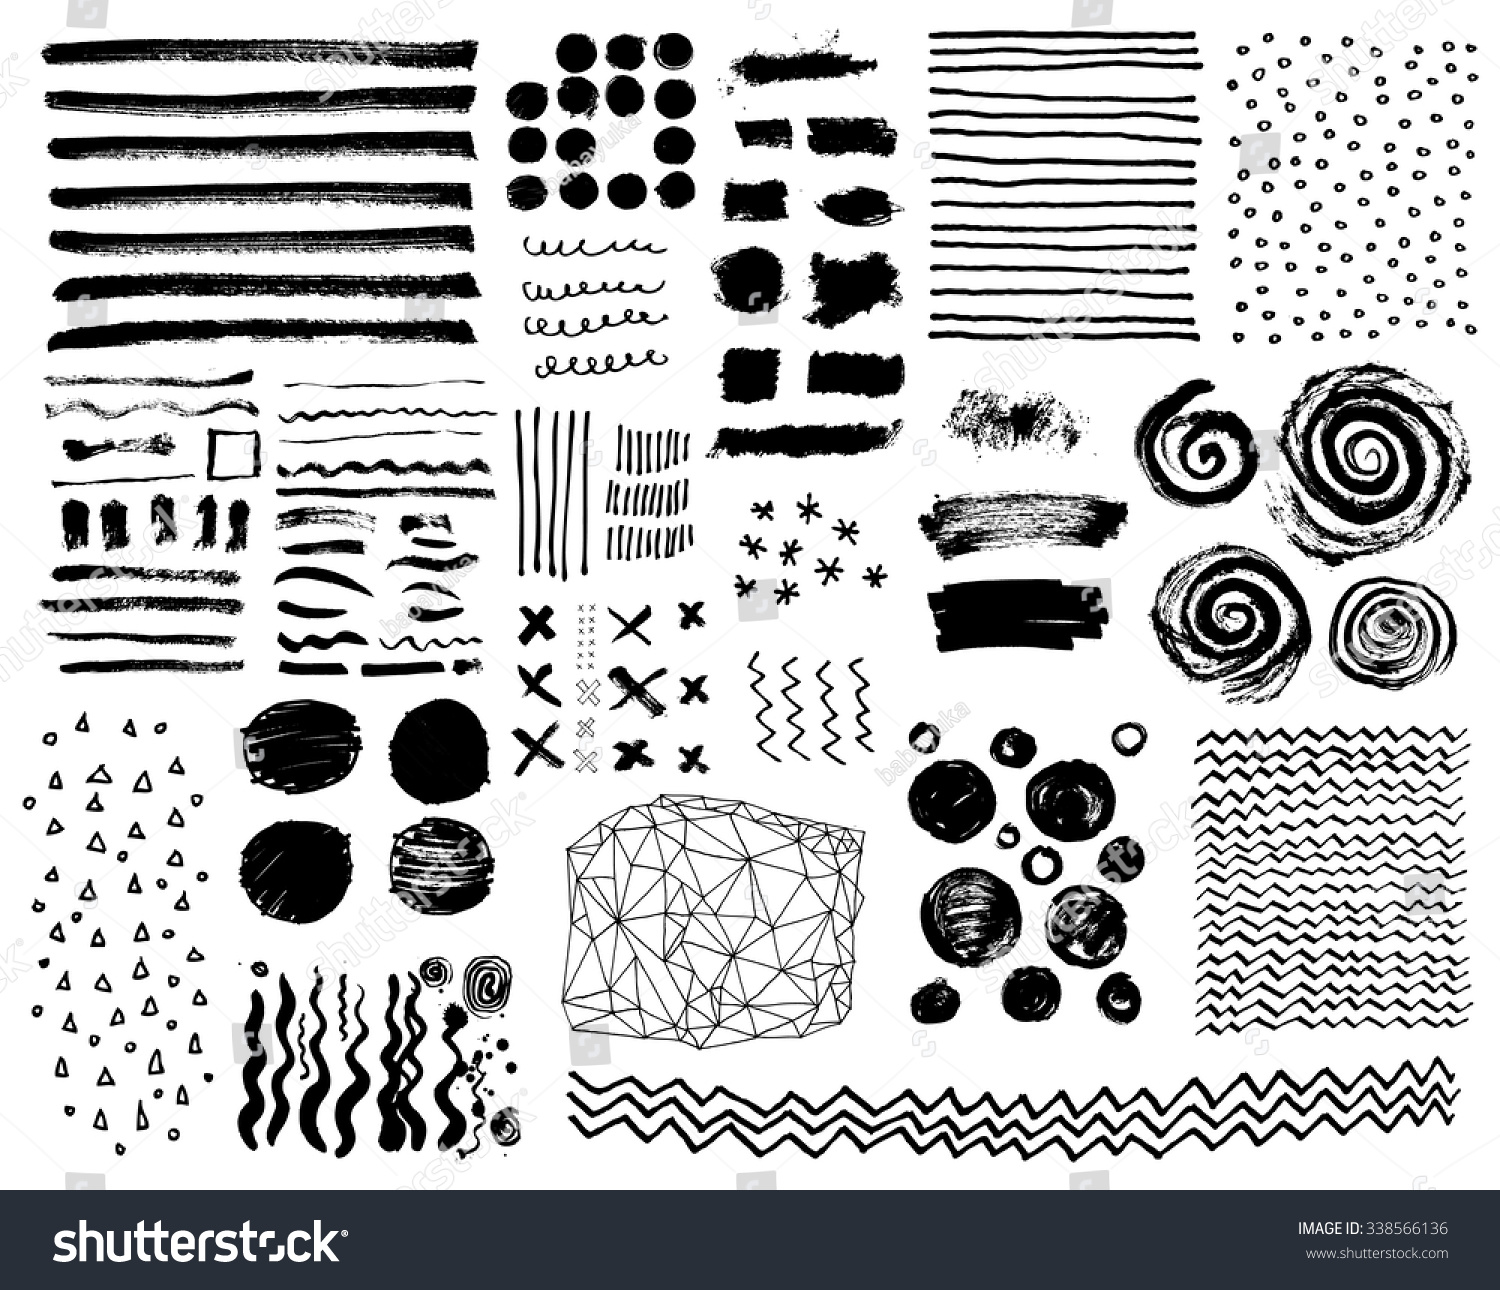 Vector set of grungy hand drawn textures. Lines, circles, crosses, smears, spirals, waves, brush strokes, triangles. Hand drawn elements for your graphic design #338566136